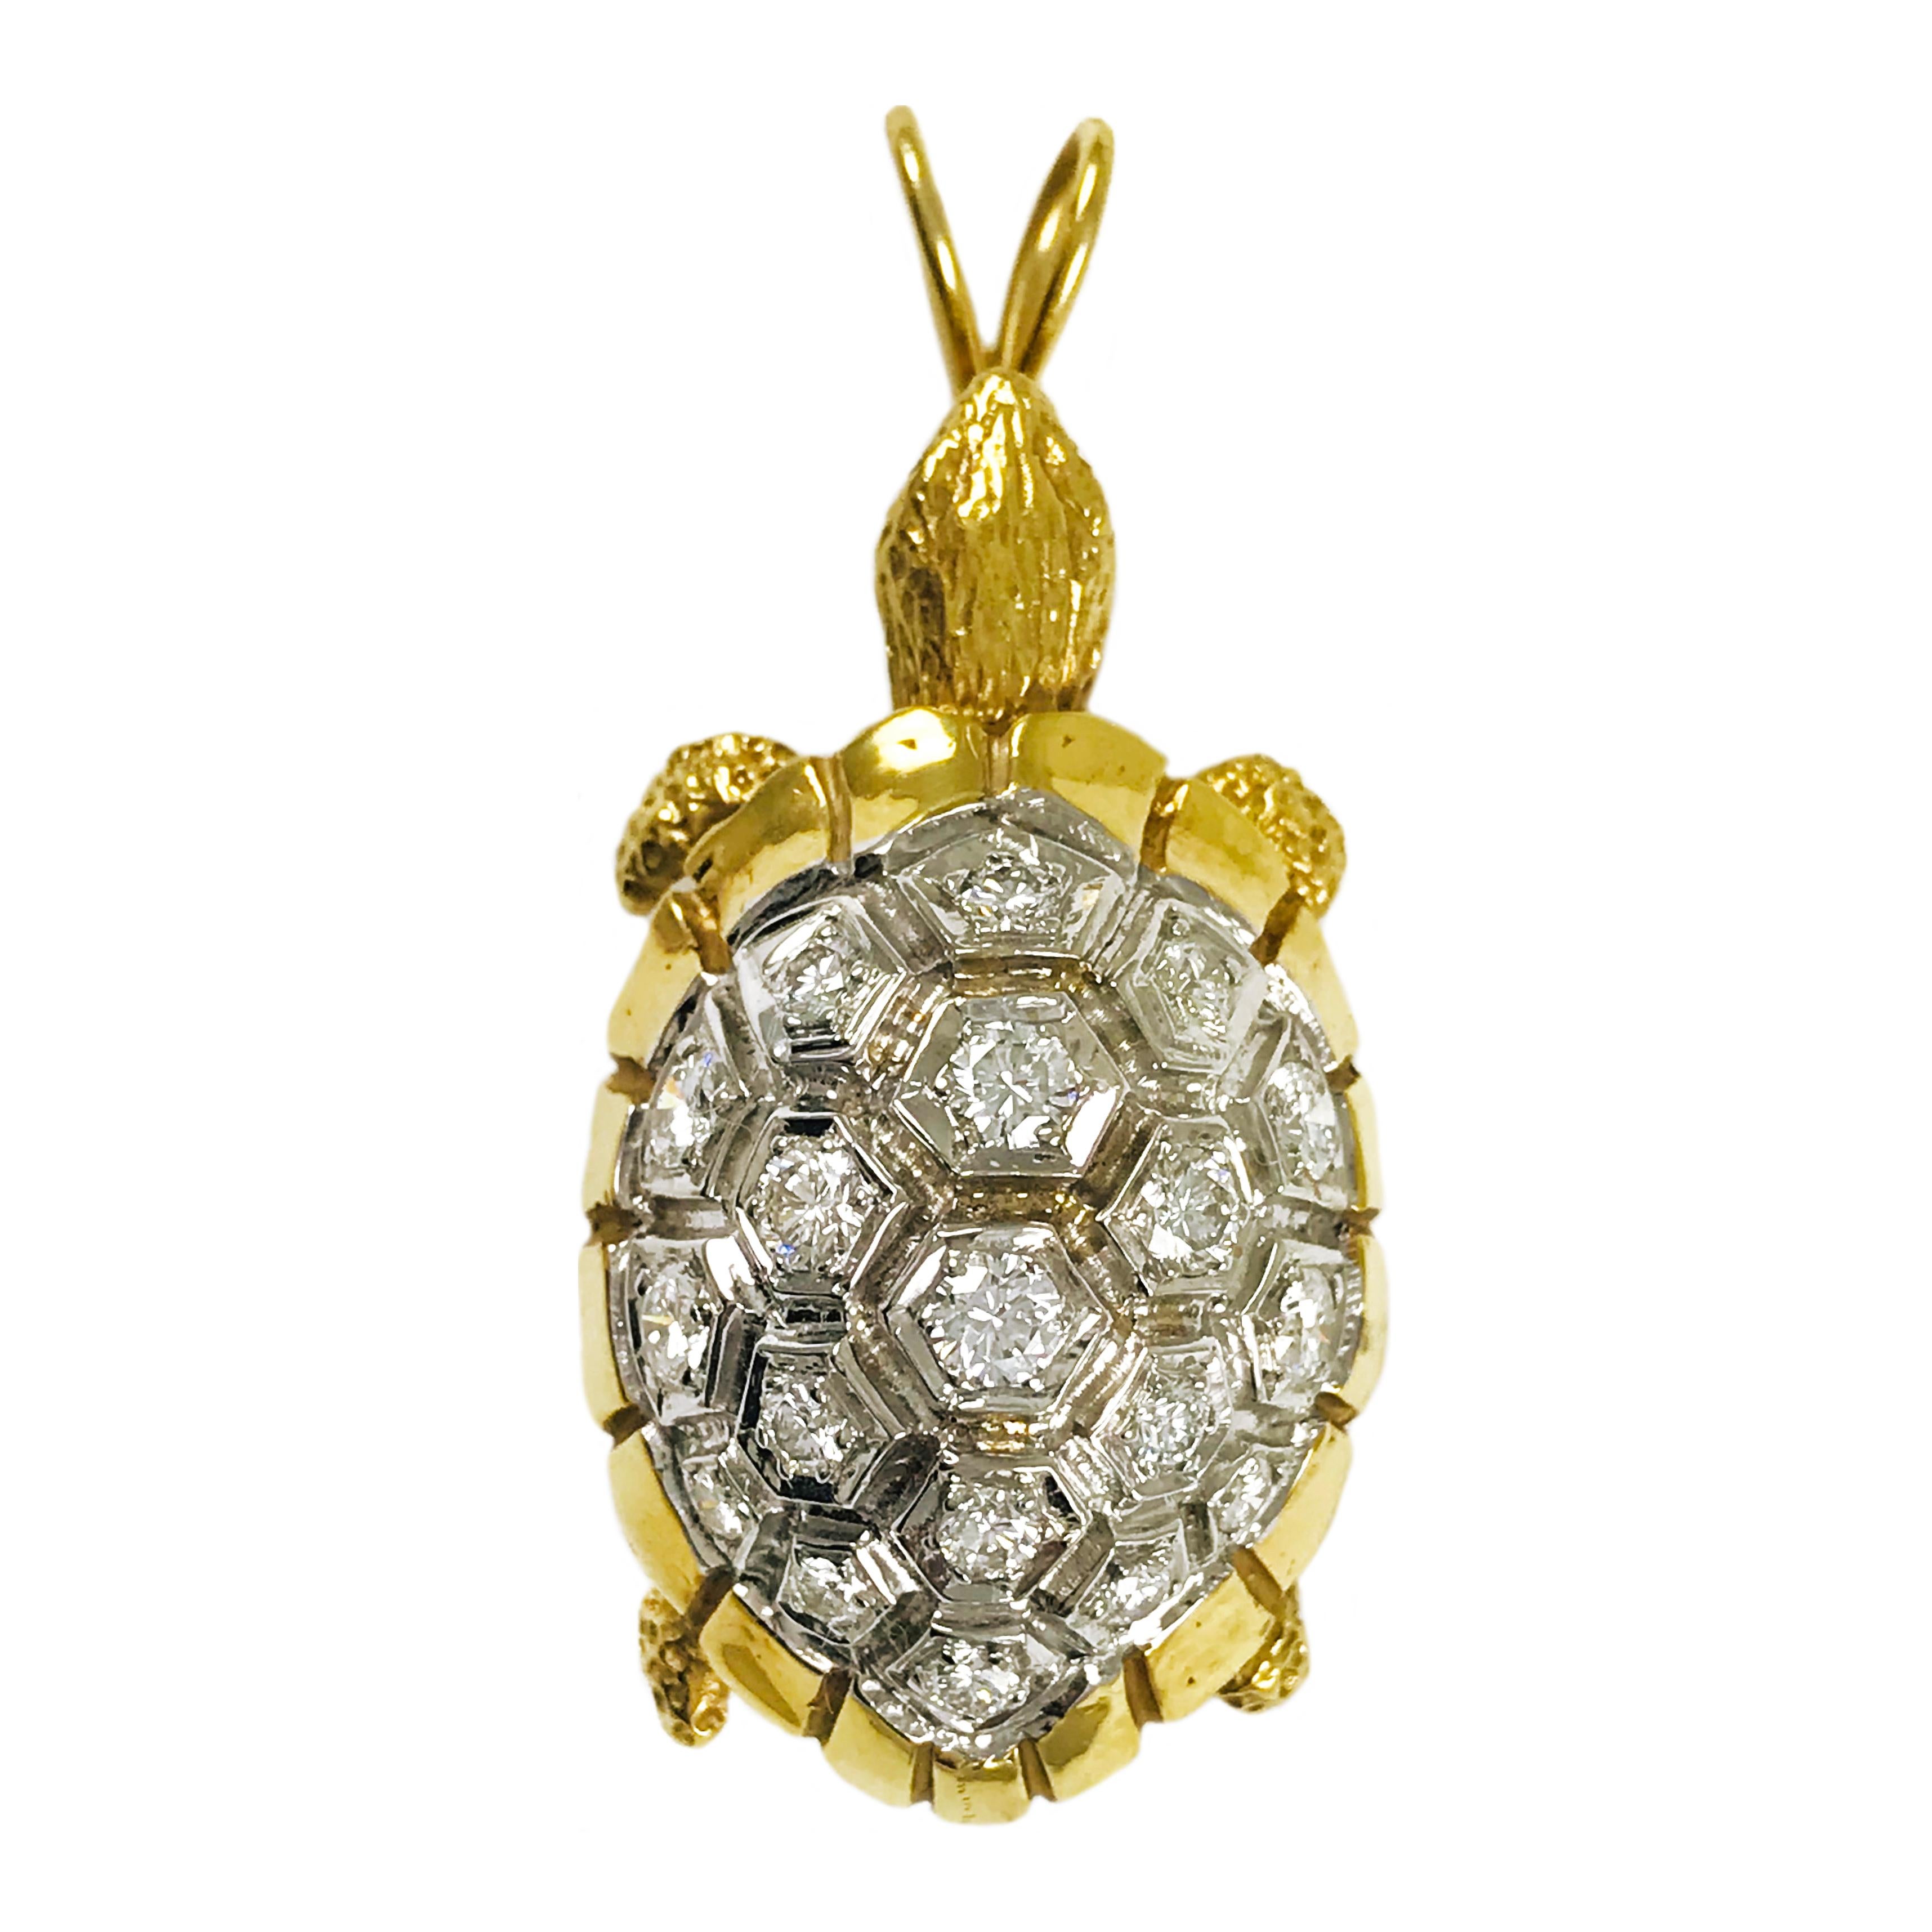 18k Two-Tone White and Yellow Gold Diamond Turtle Pendant/Brooch. Rabbit Bail and brooch closure, missing pin only. Nineteen round diamonds form the shell of the turtle. Diamonds are VS2 (G.I.A.) in clarity and G-H (G.I.A.) in color with a weight of